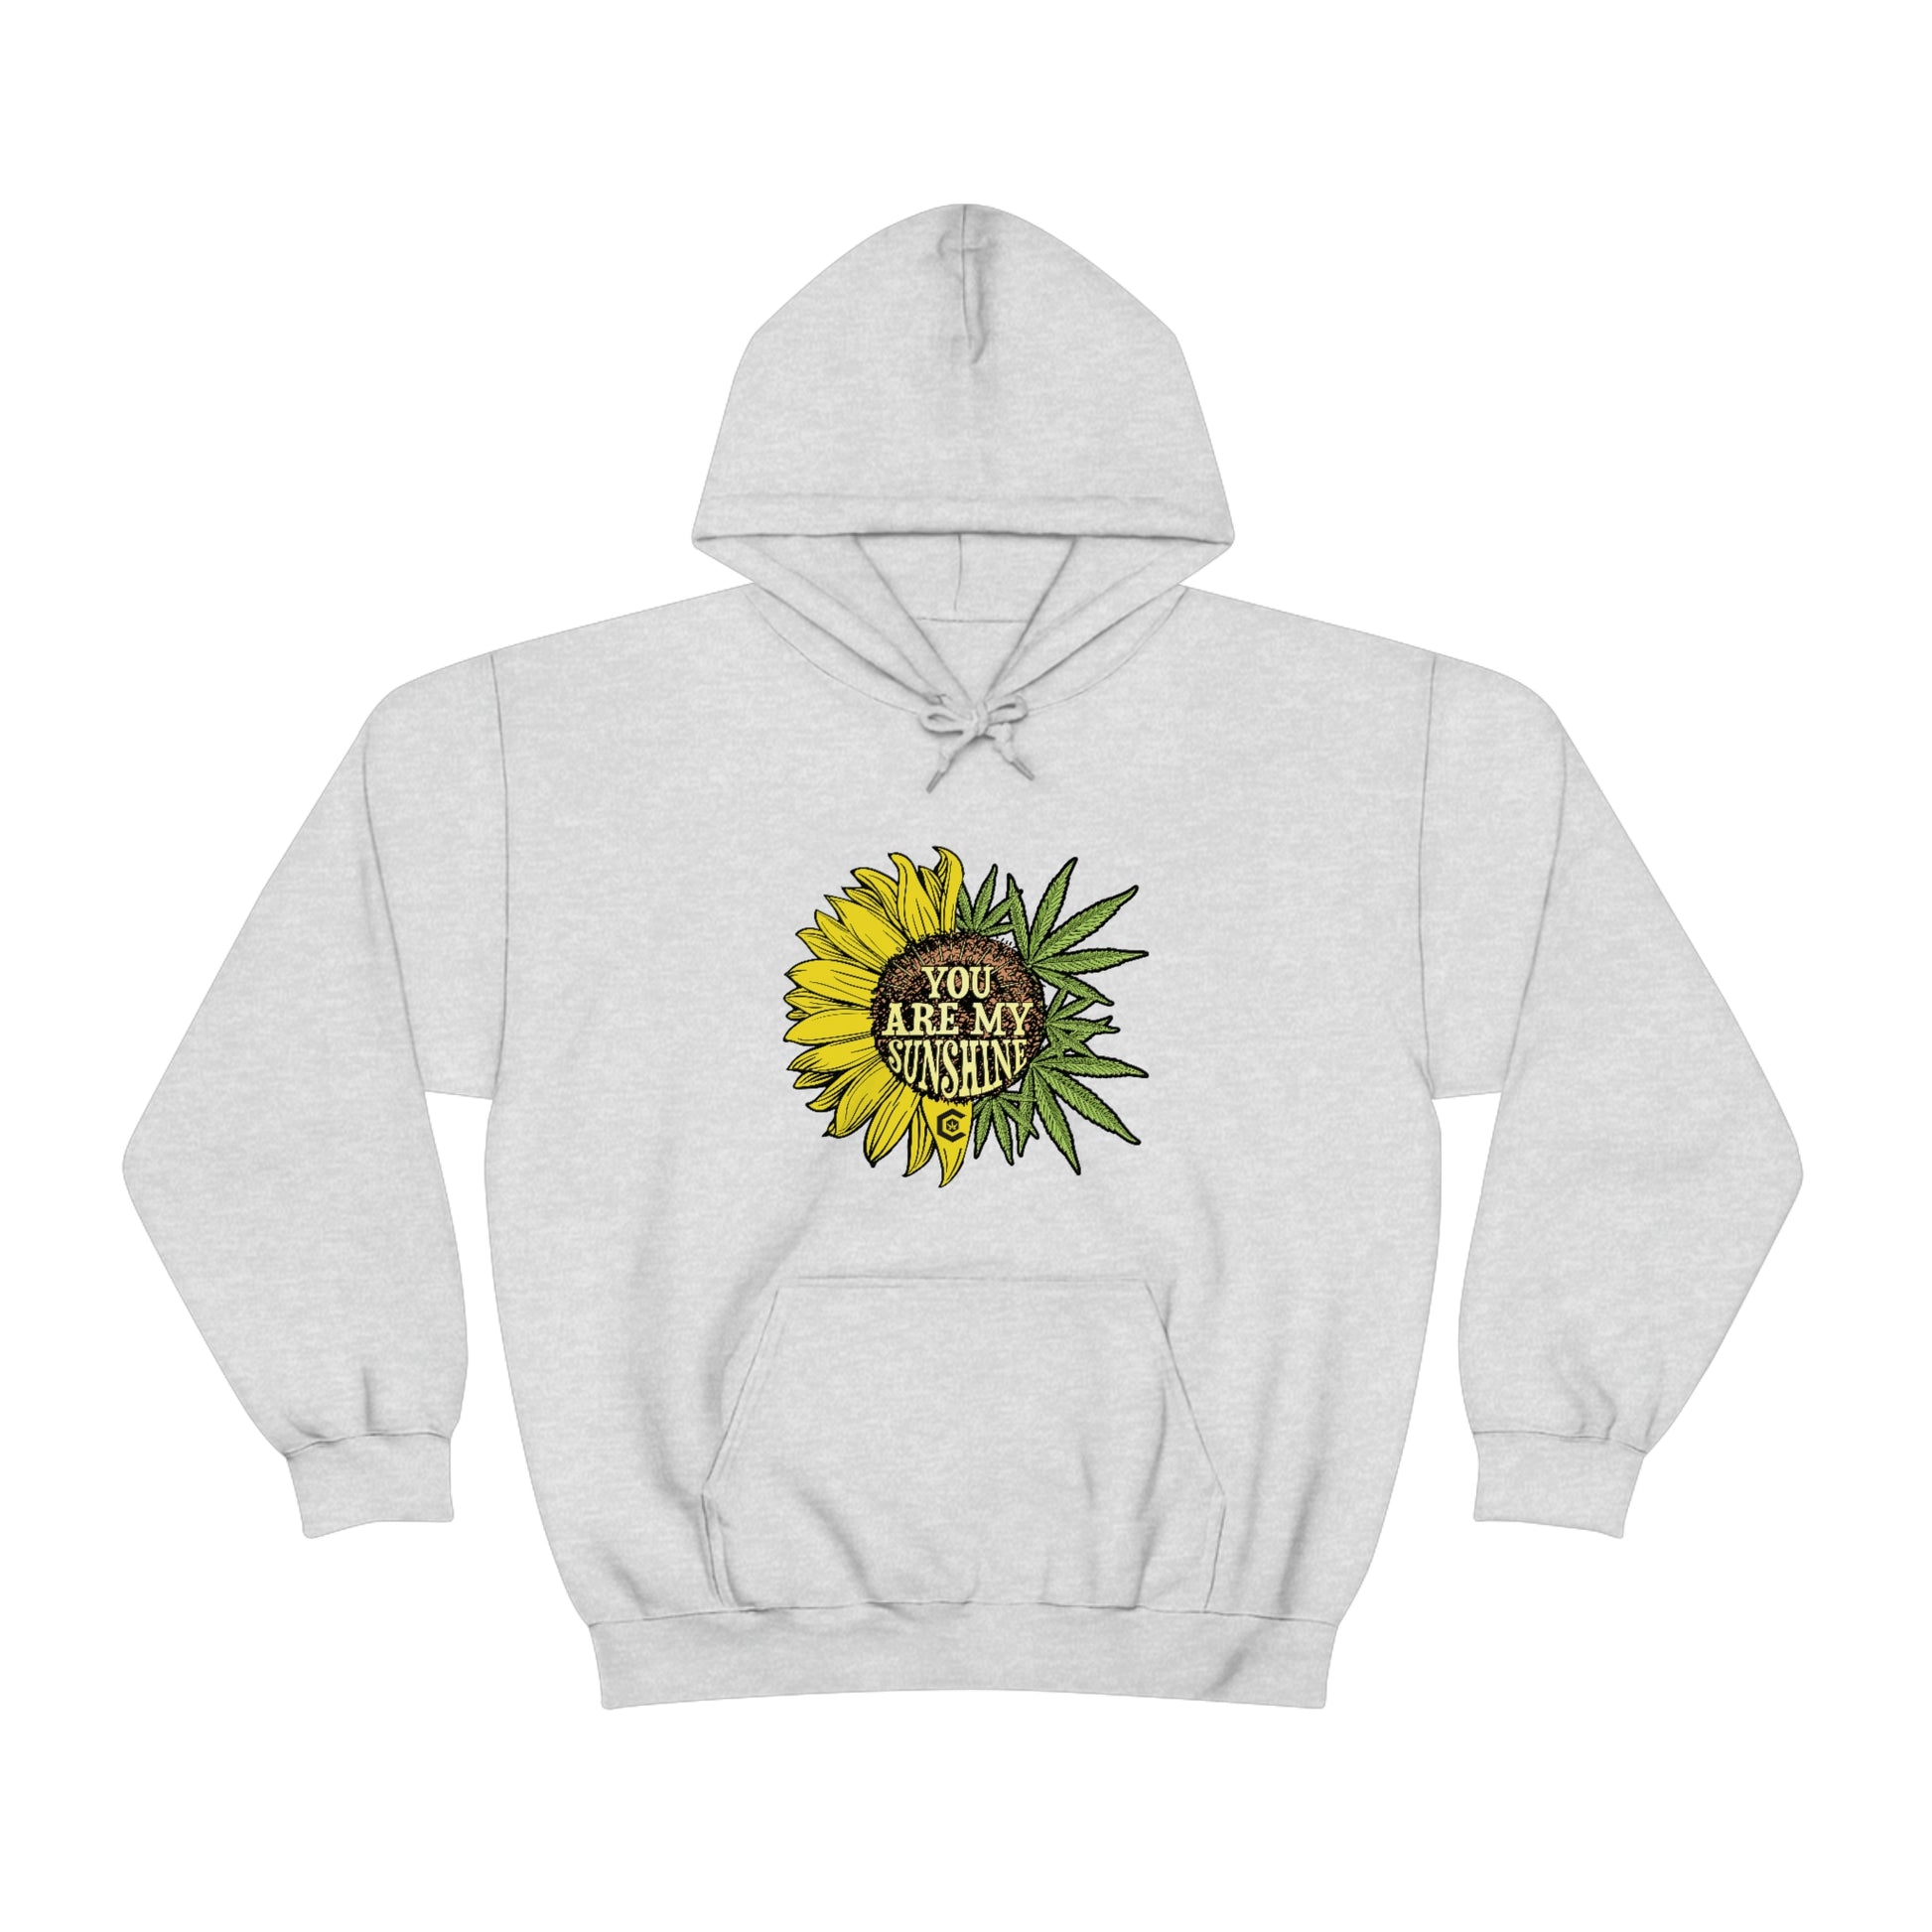 a You Are My Sunshine Cannabis Sweatshirt with a sunflower on it.